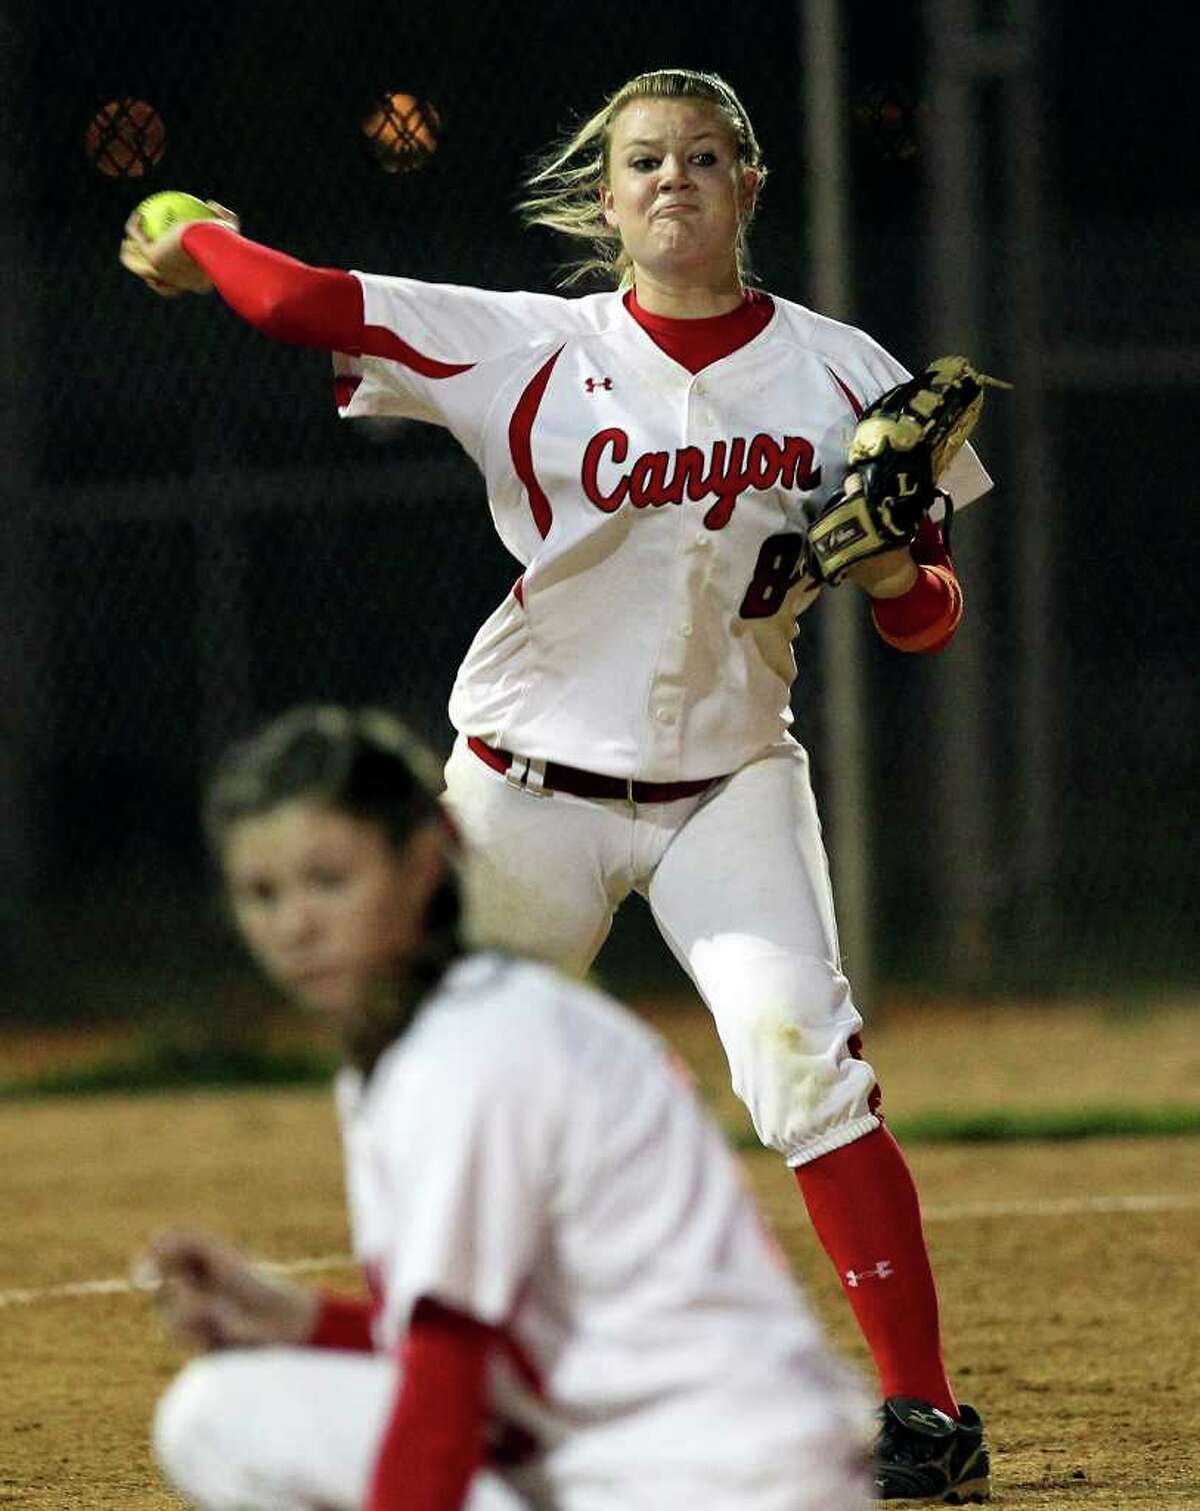 Kaitlyn Hollingshead fires to first for the Cougars as Canyon host Smithson Valley in softball on March 30, 2012. Tom Reel/ San Antonio Express-News